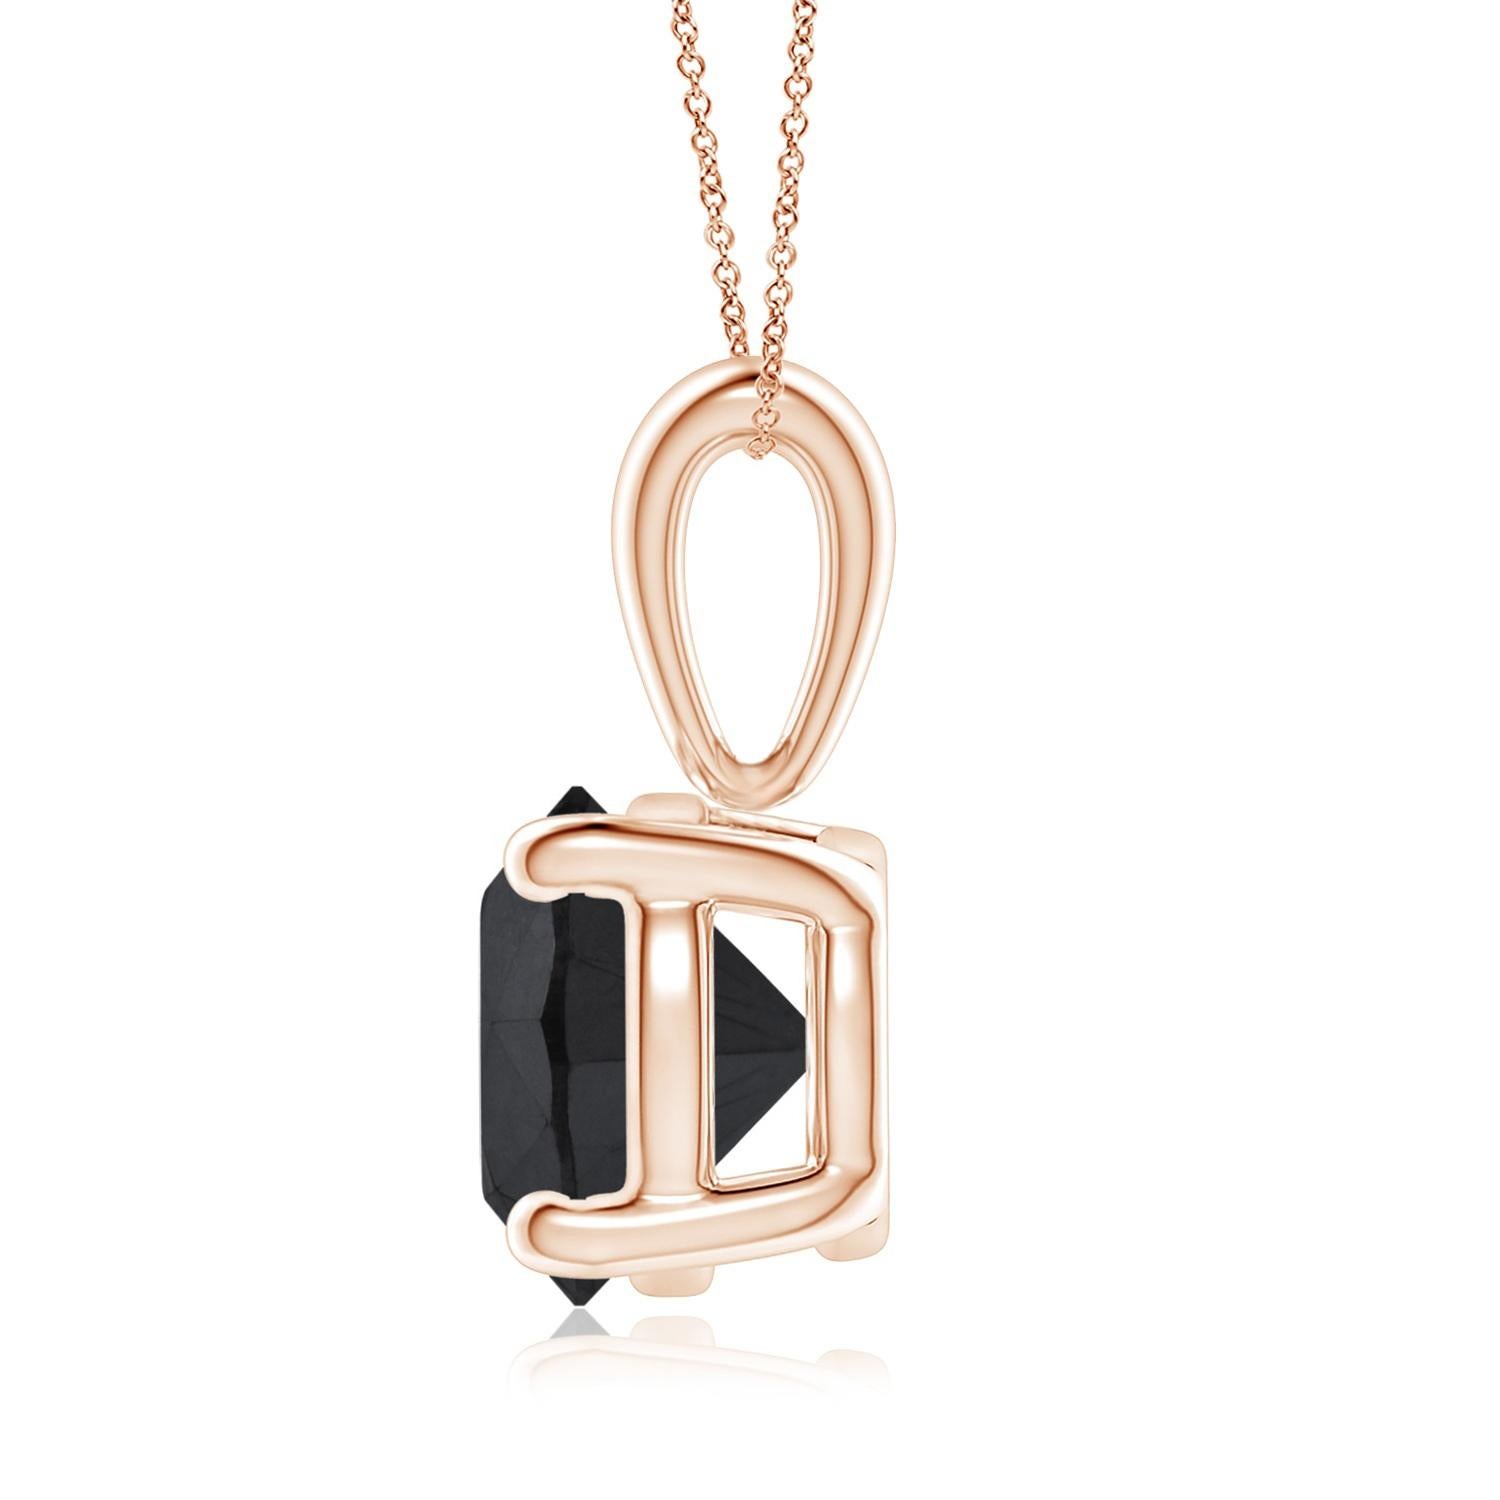 Surprise a special woman in your life with this breathtaking, statement hand crafted solitaire black diamond necklace. This eye-catching pendant necklace features a 3.13 carat round cut black diamond, measuring 8.32 x 8.38 x 6.69 mm set in 14k rose